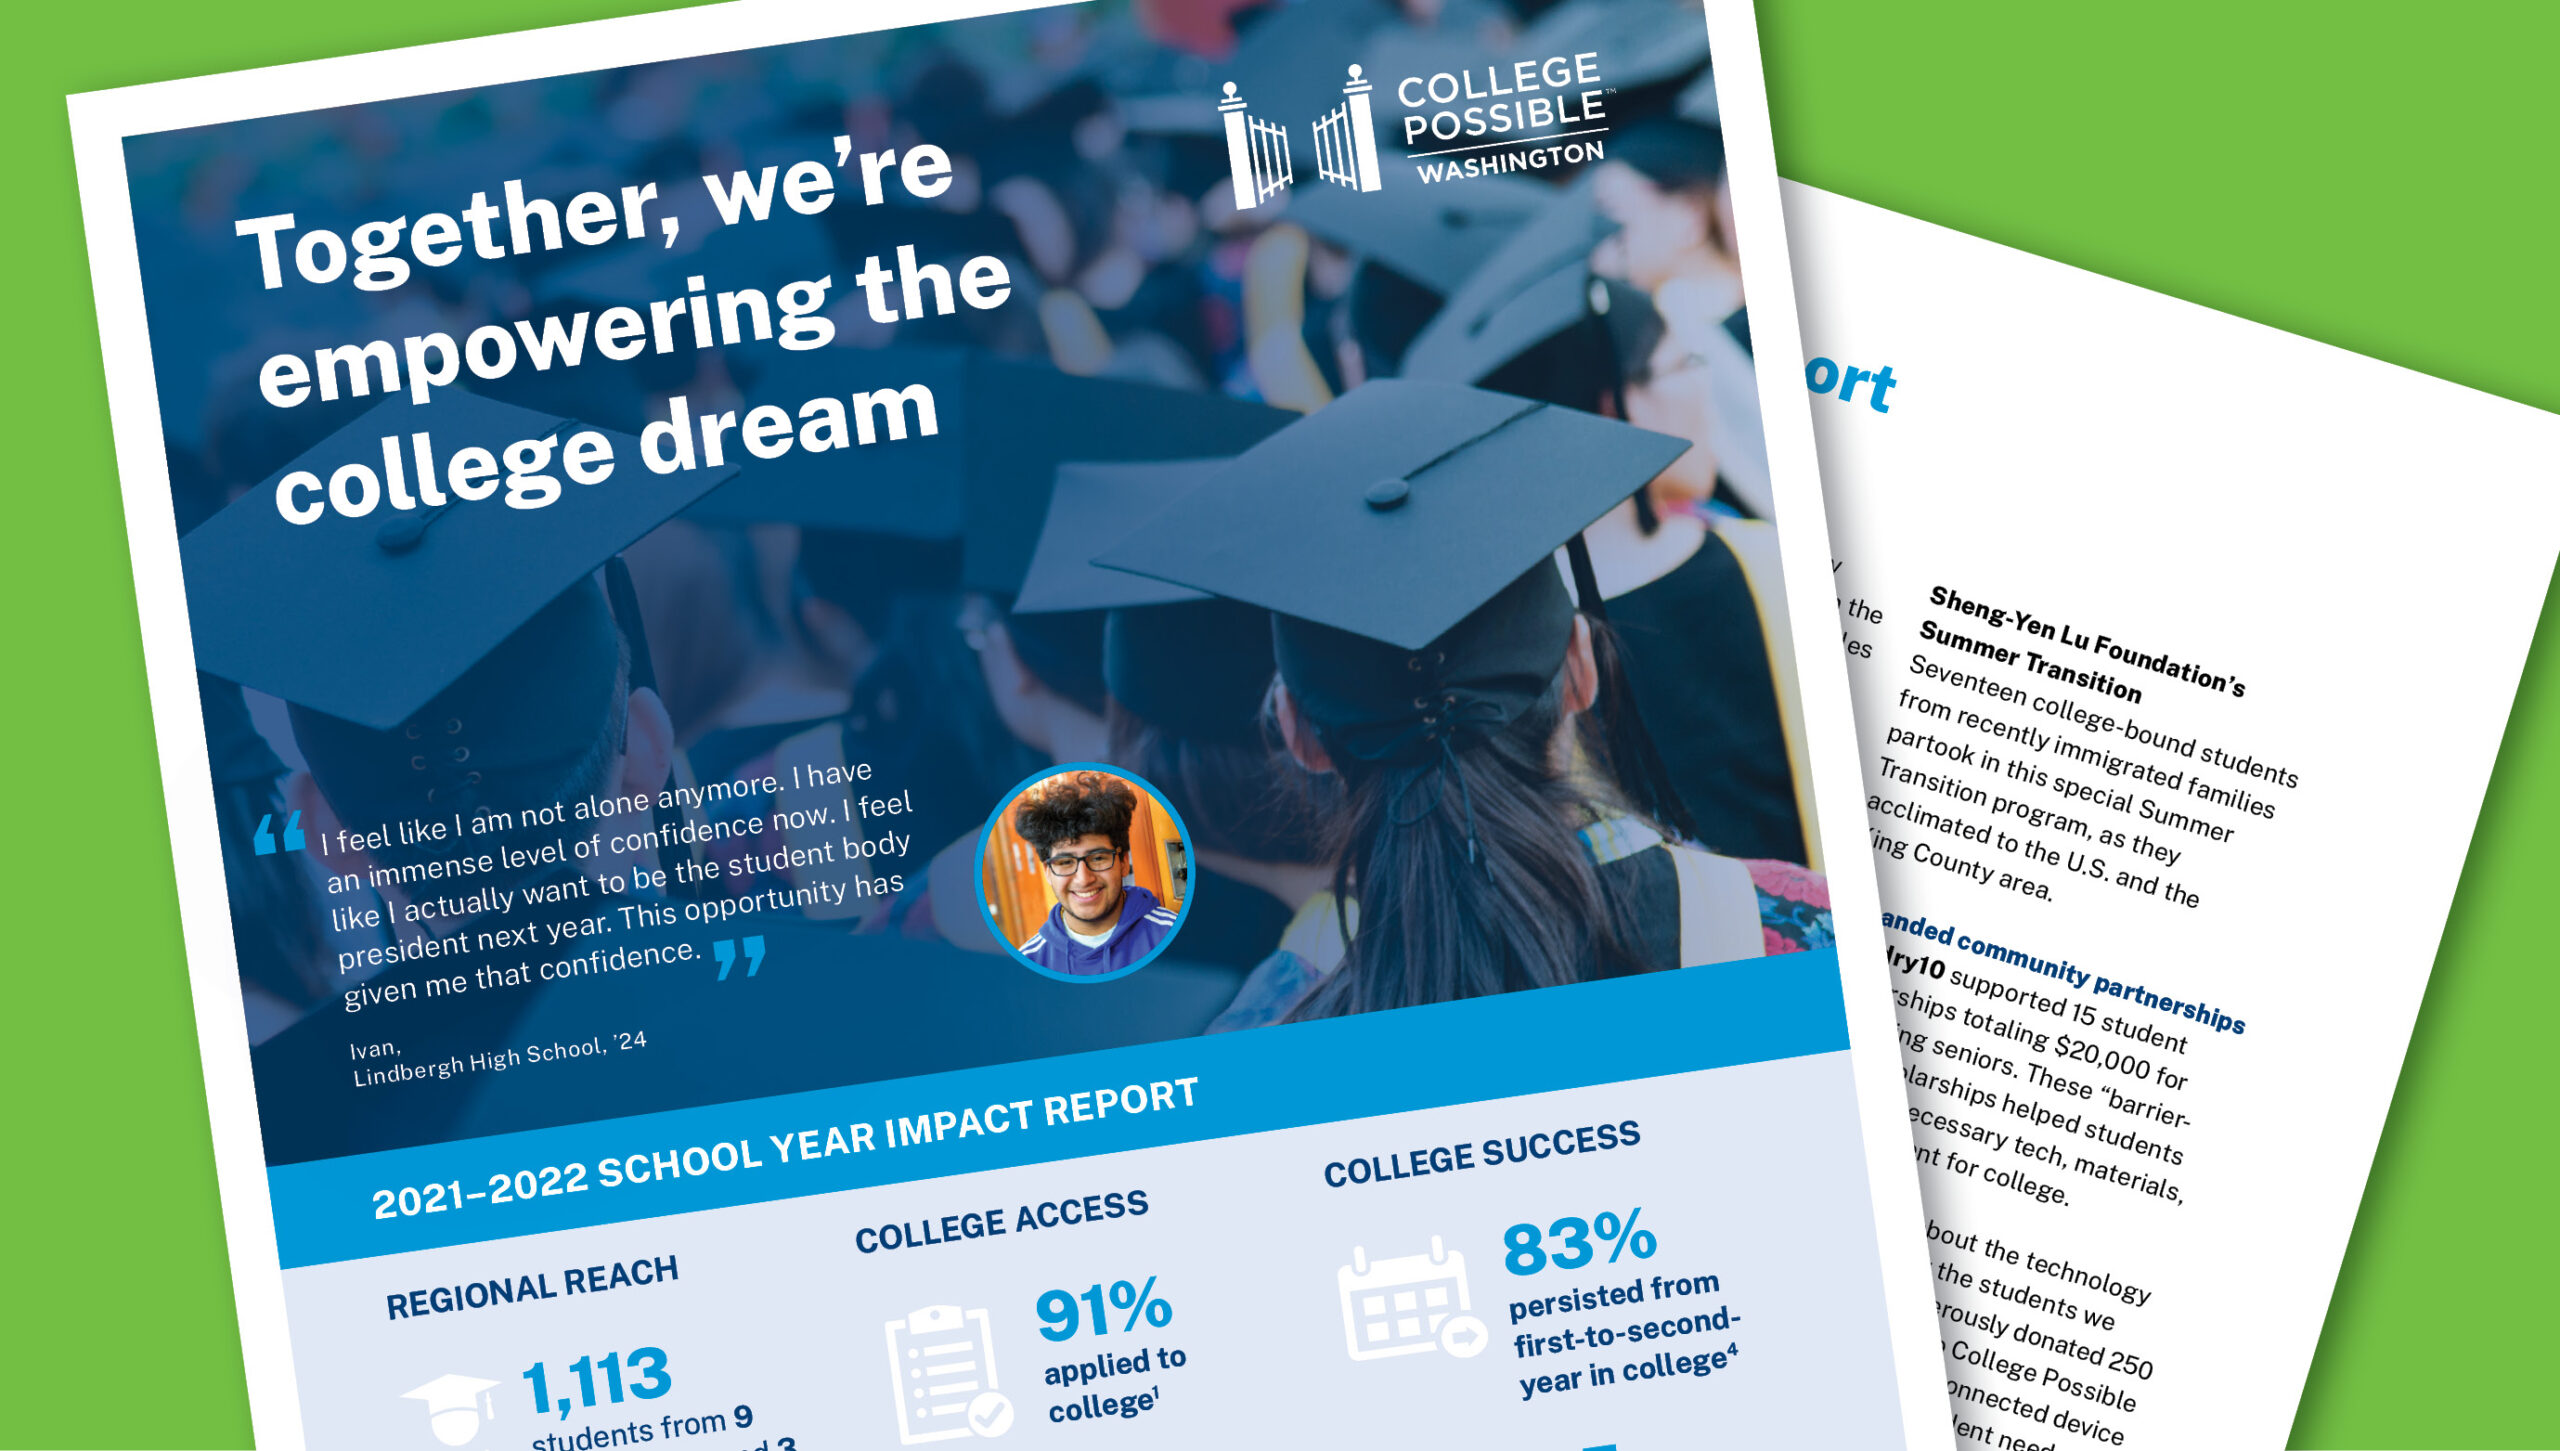 Mockup image of the College Possible Washington impact report for 2021-22